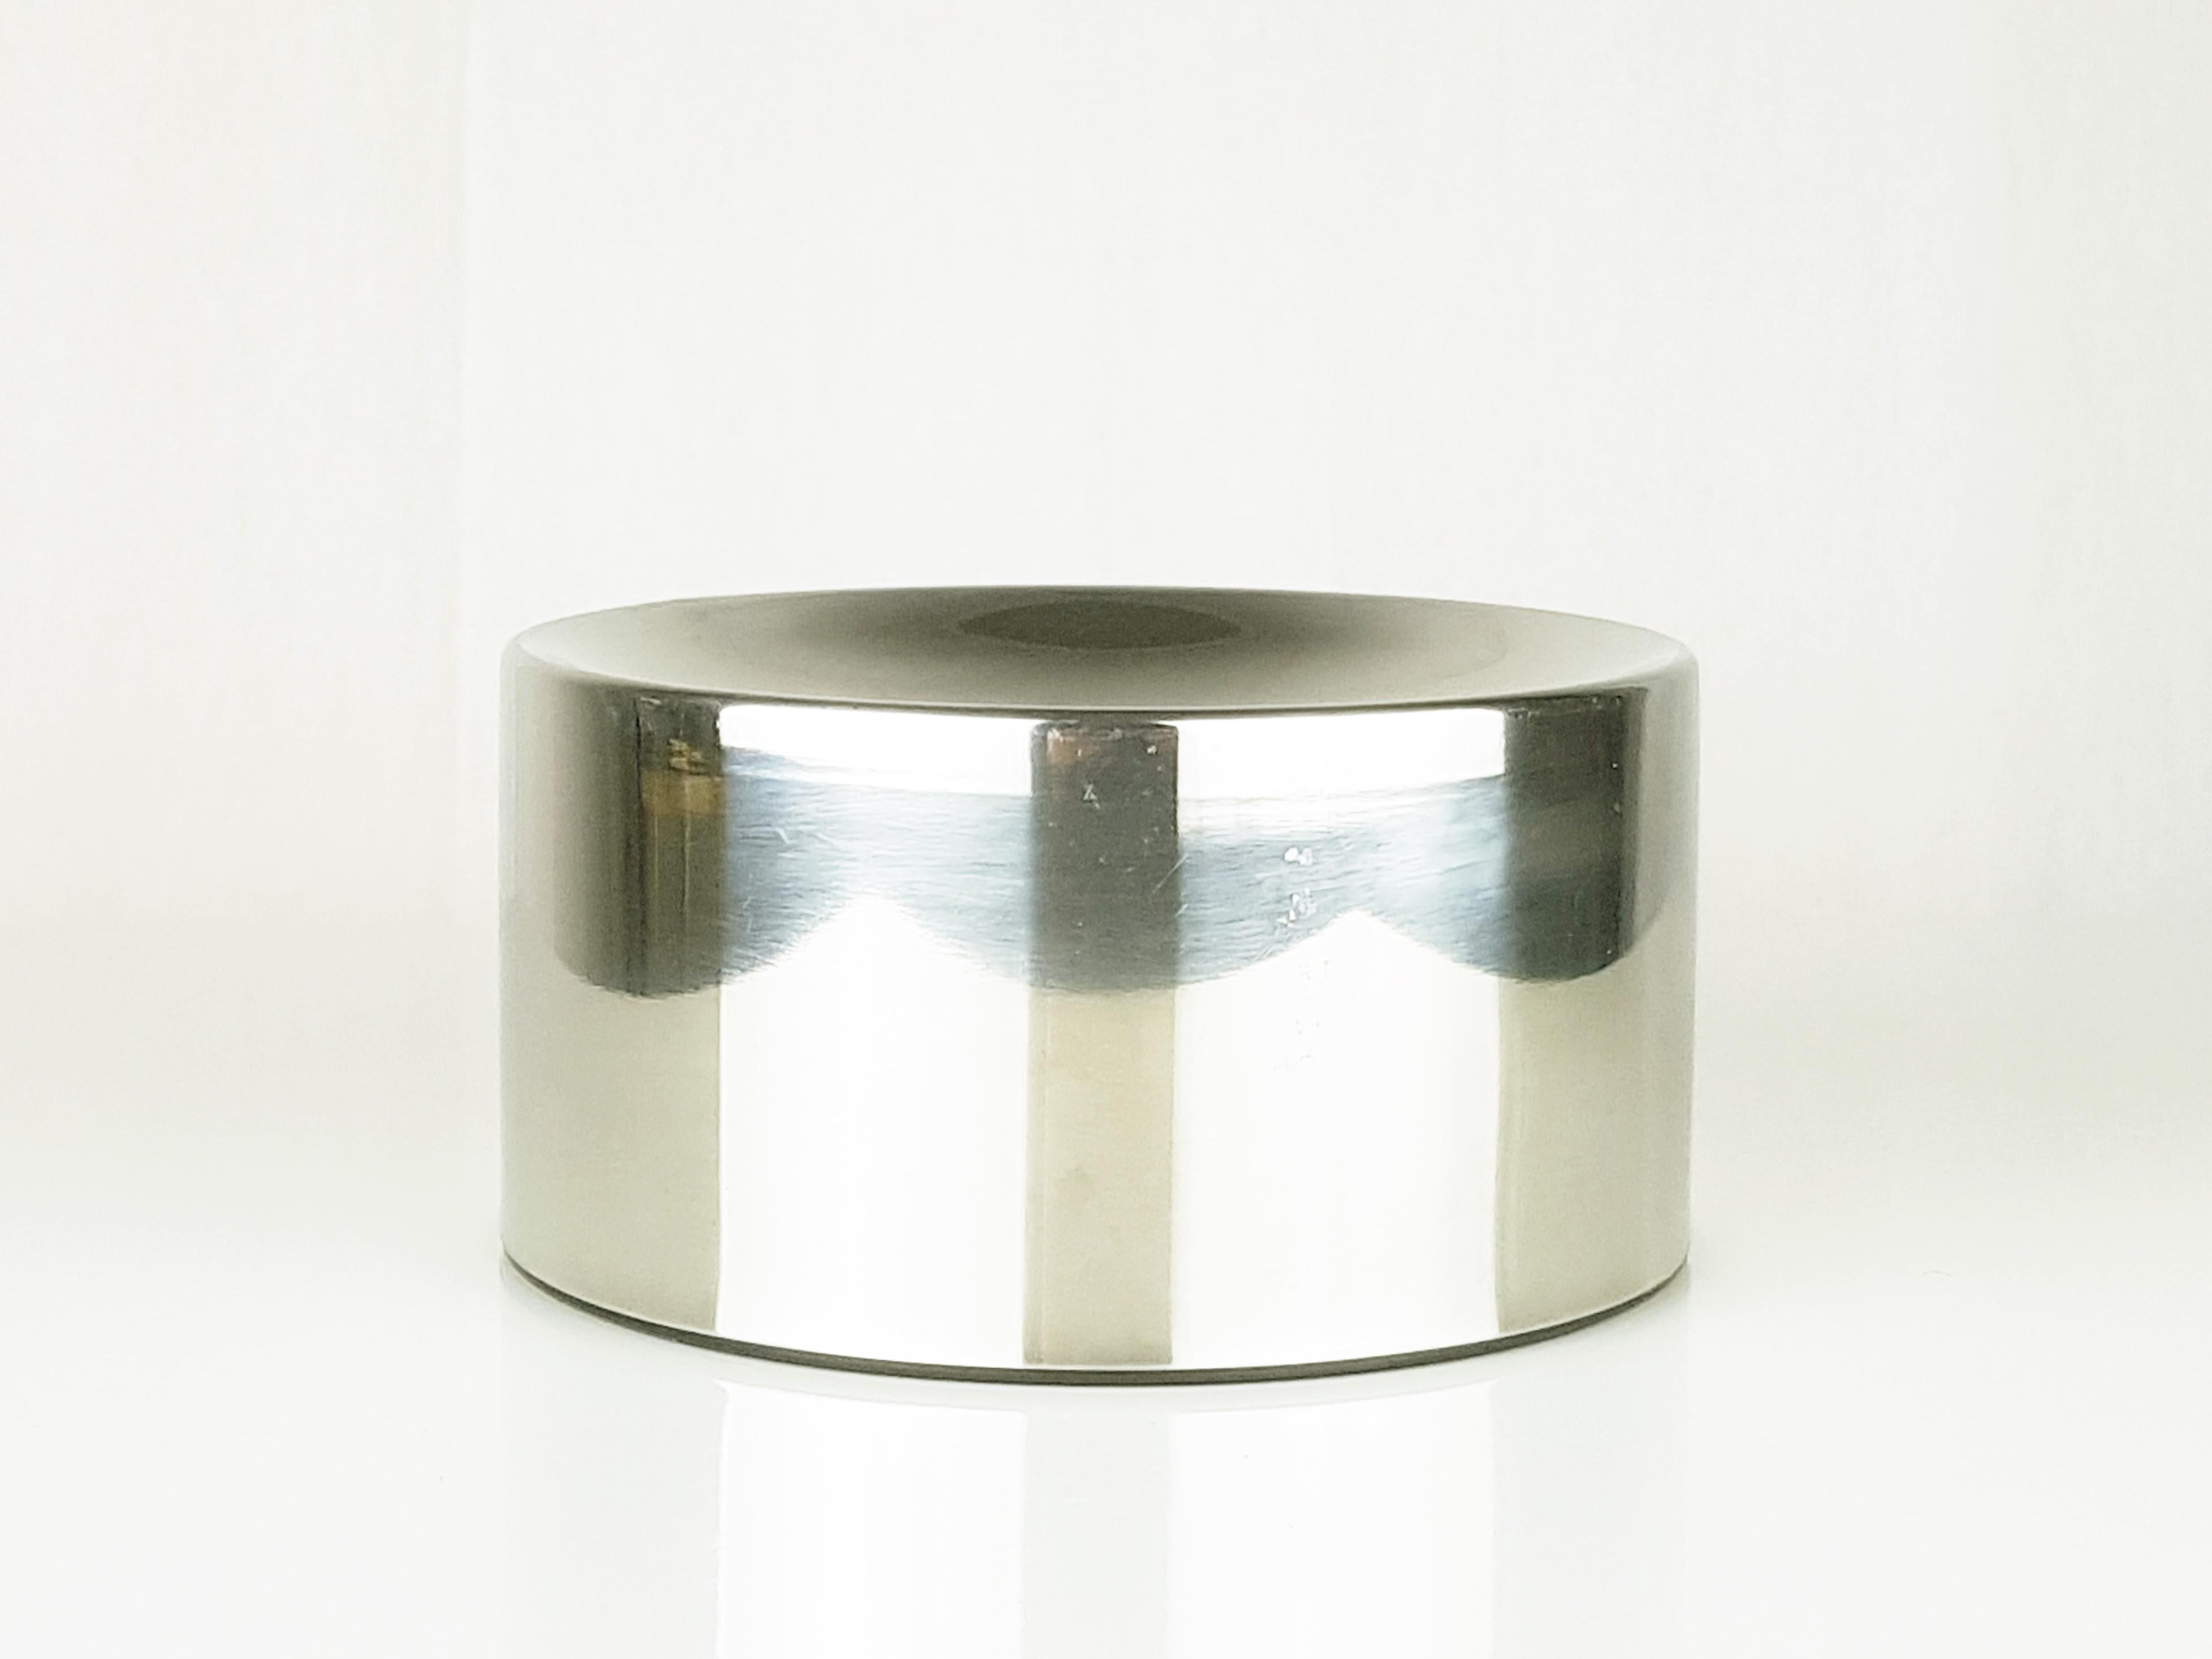 Steel & Plastic 1960s Table Ashtray by E. Gismondi Schweinberger for Artemide In Good Condition For Sale In Varese, Lombardia